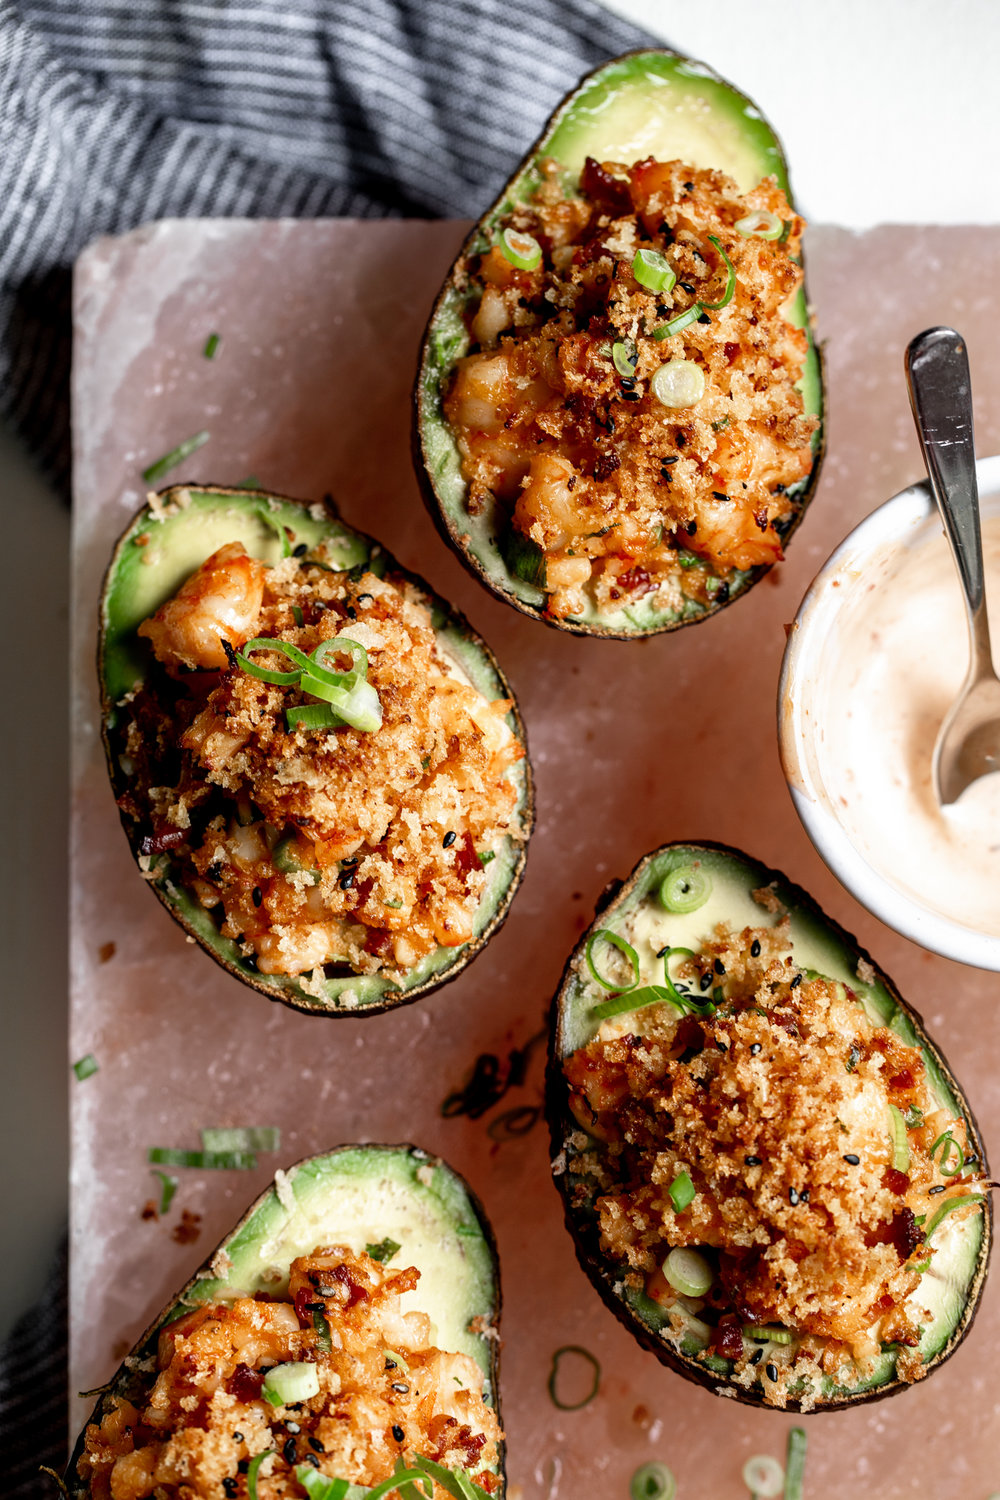 Spicy Shrimp-Salad Stuffed Baked Avocados recipe from cooking with cocktail rings